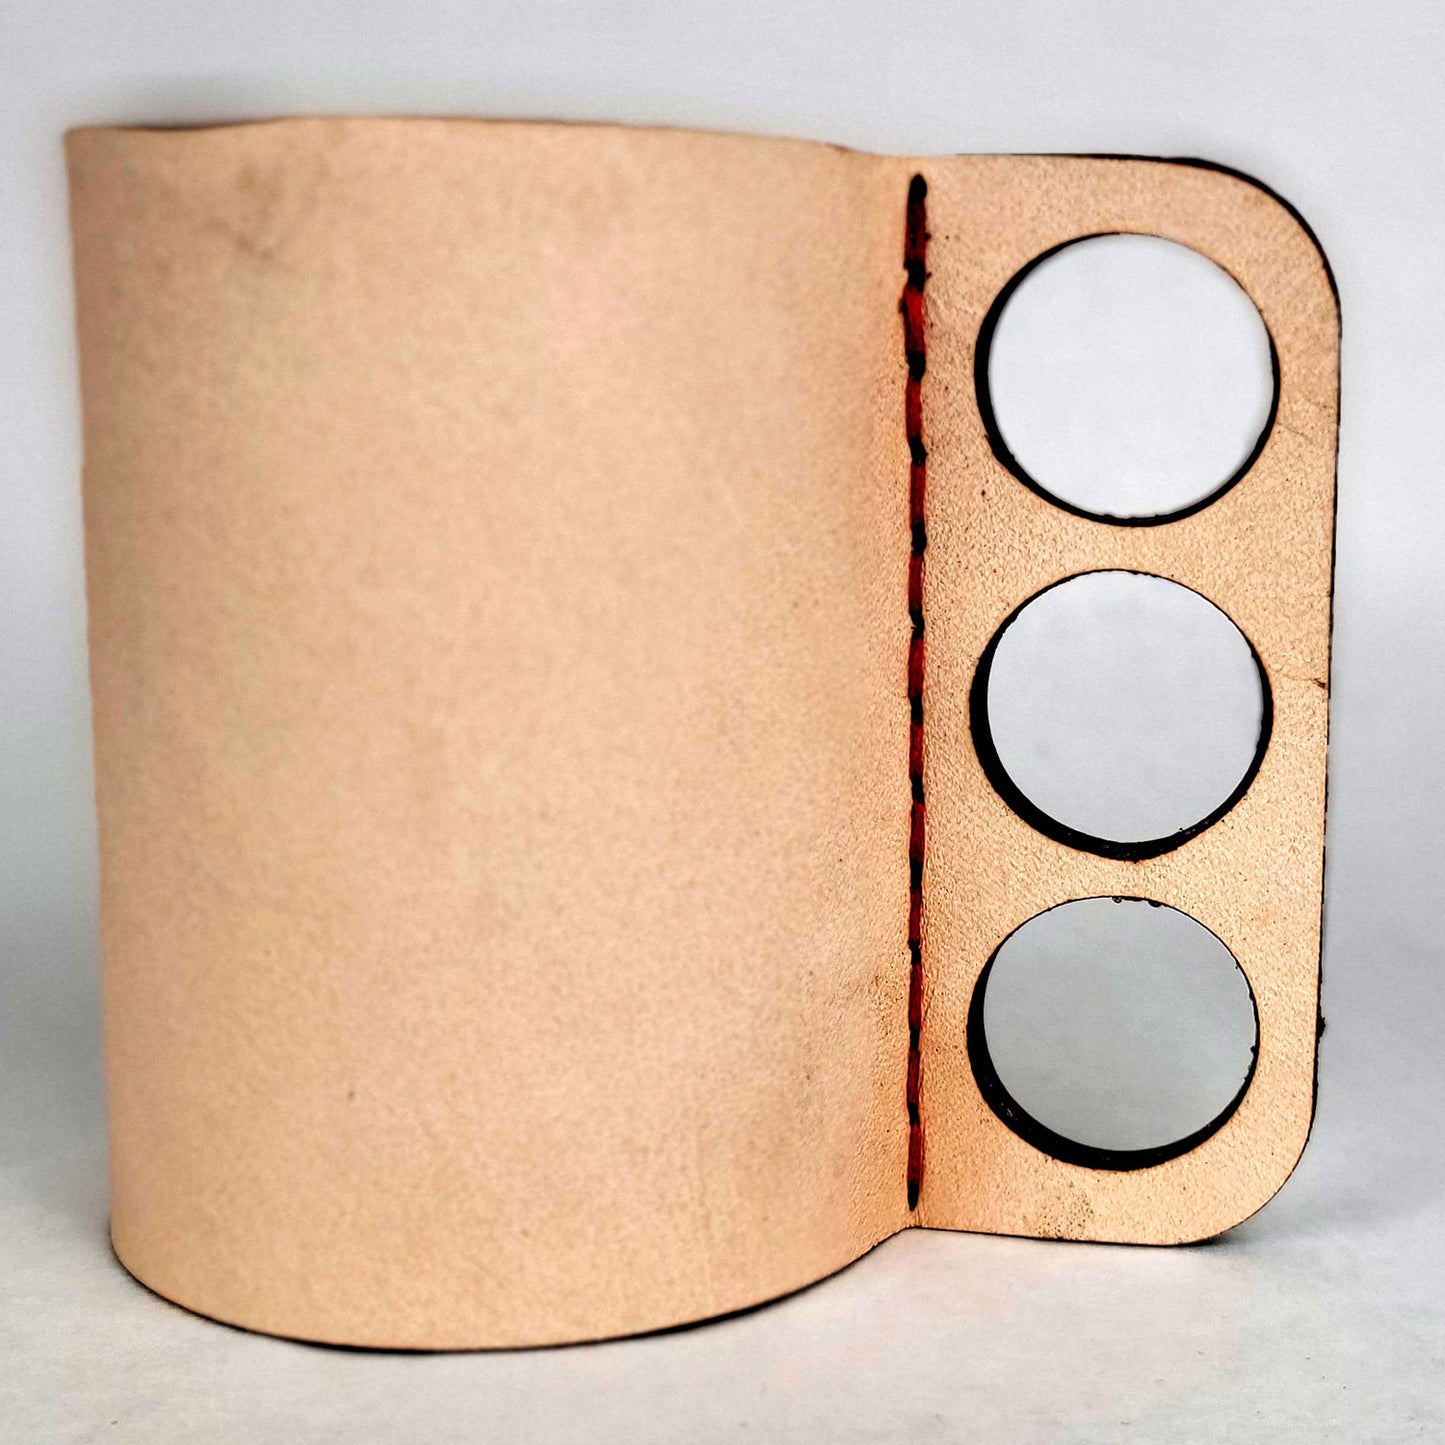 Leather Beverage Can Cozy